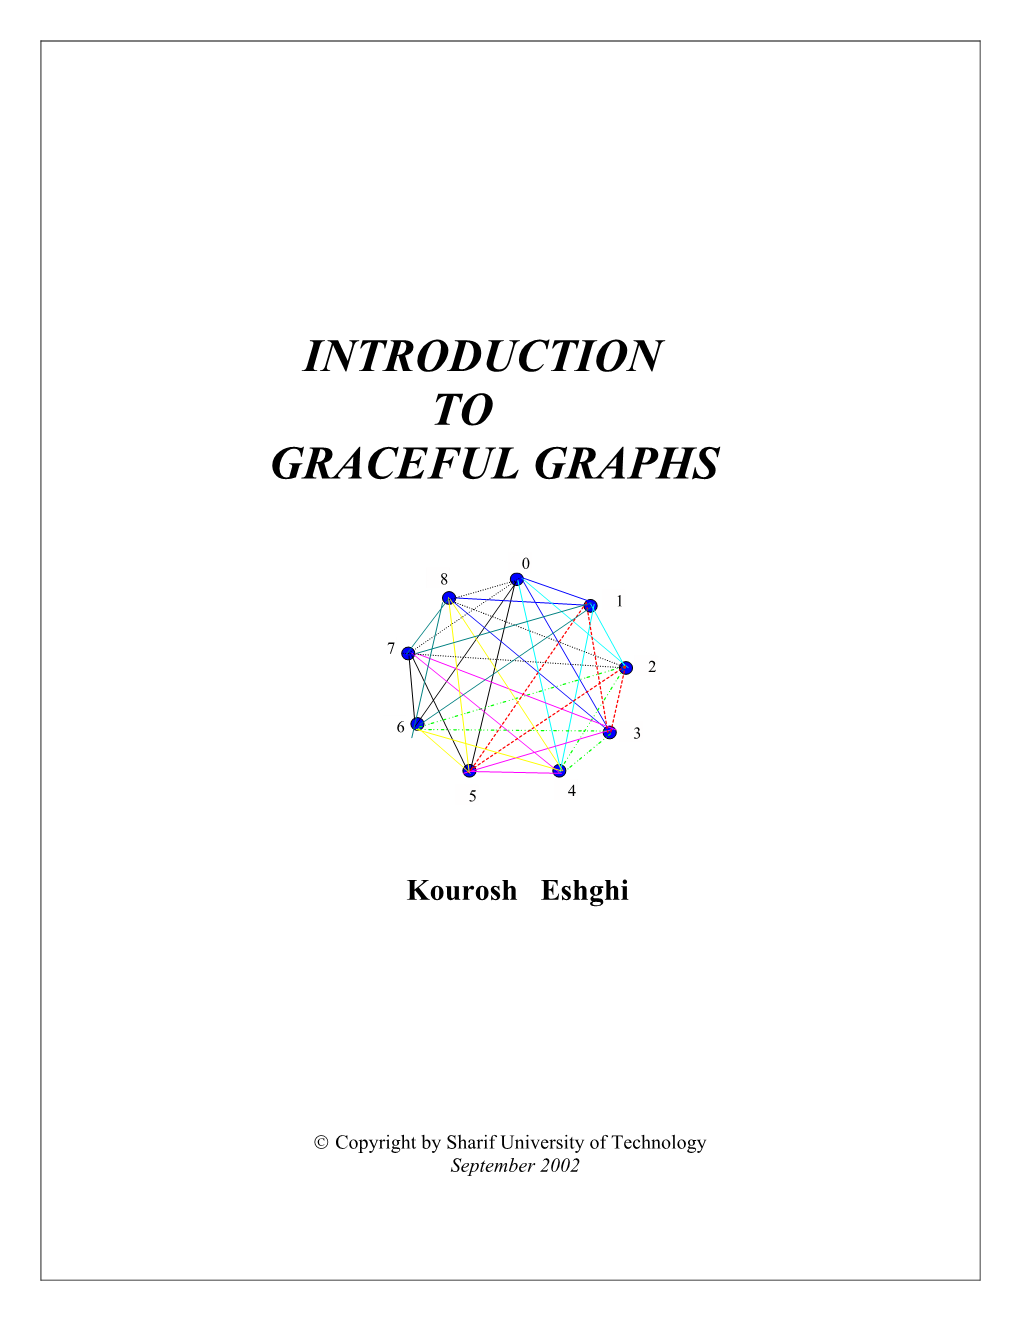 Introduction to Graceful Graphs